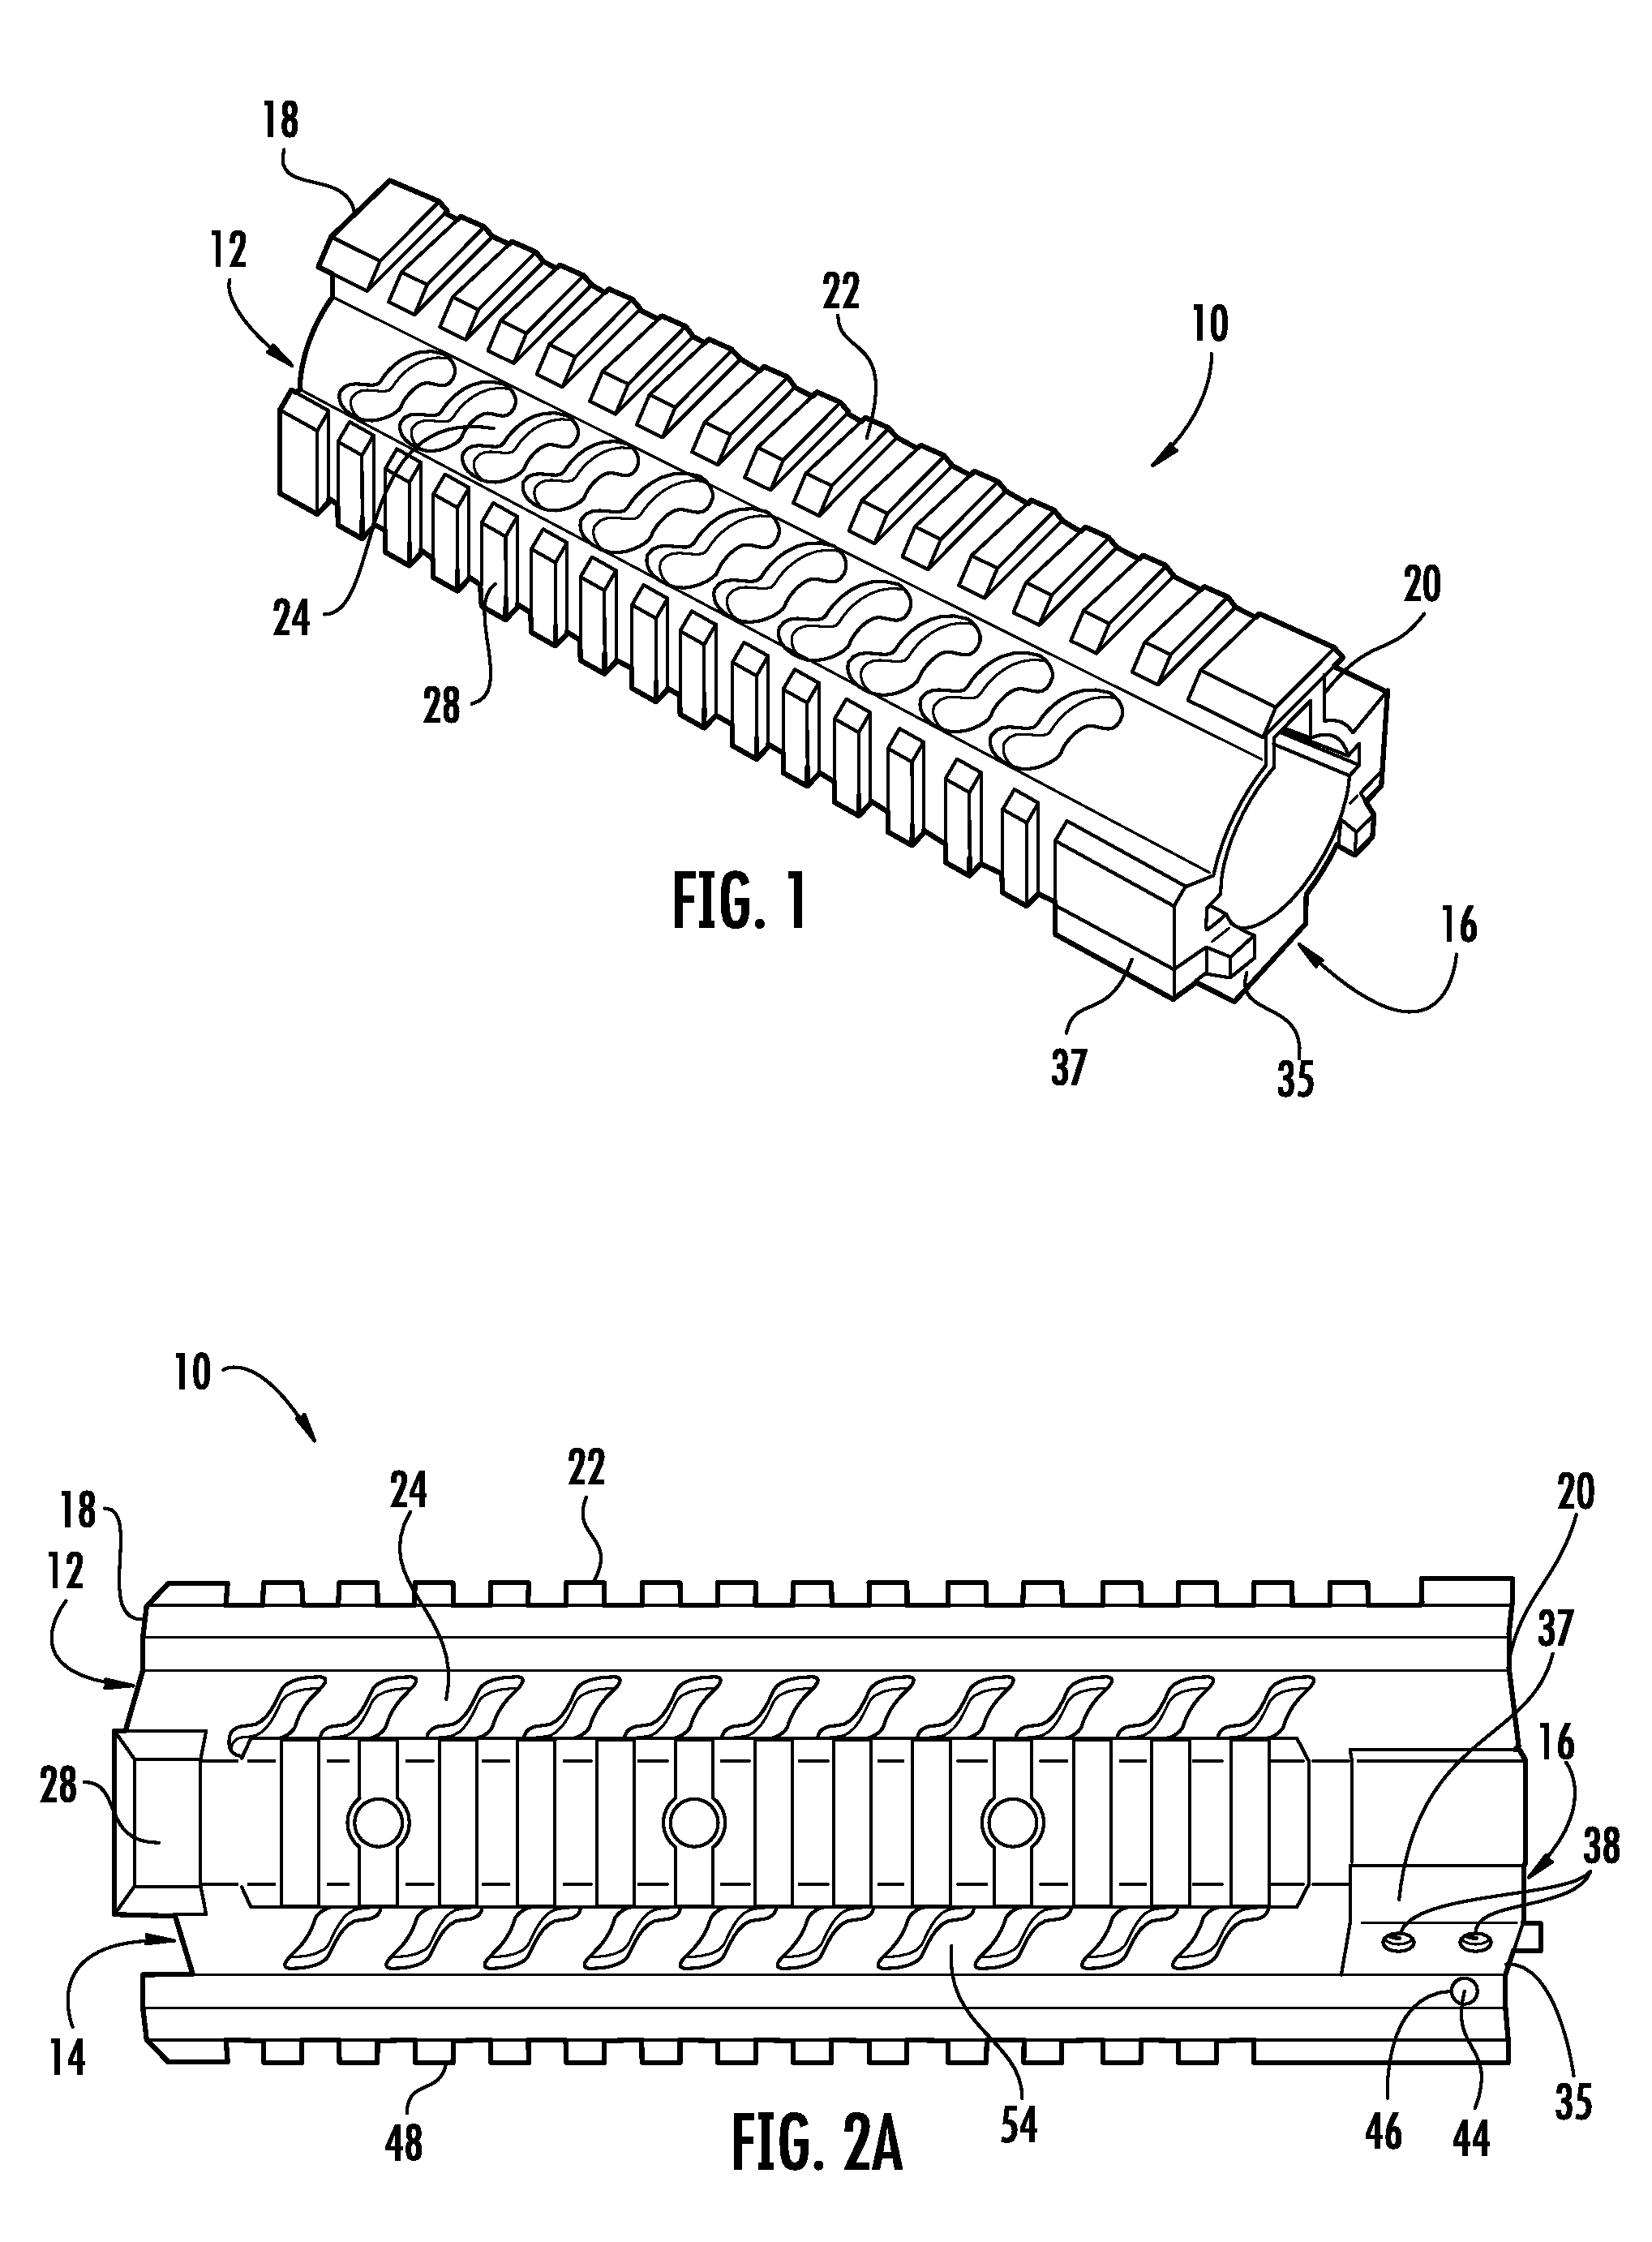 Modular fore-end rail assembly with locking mechanism